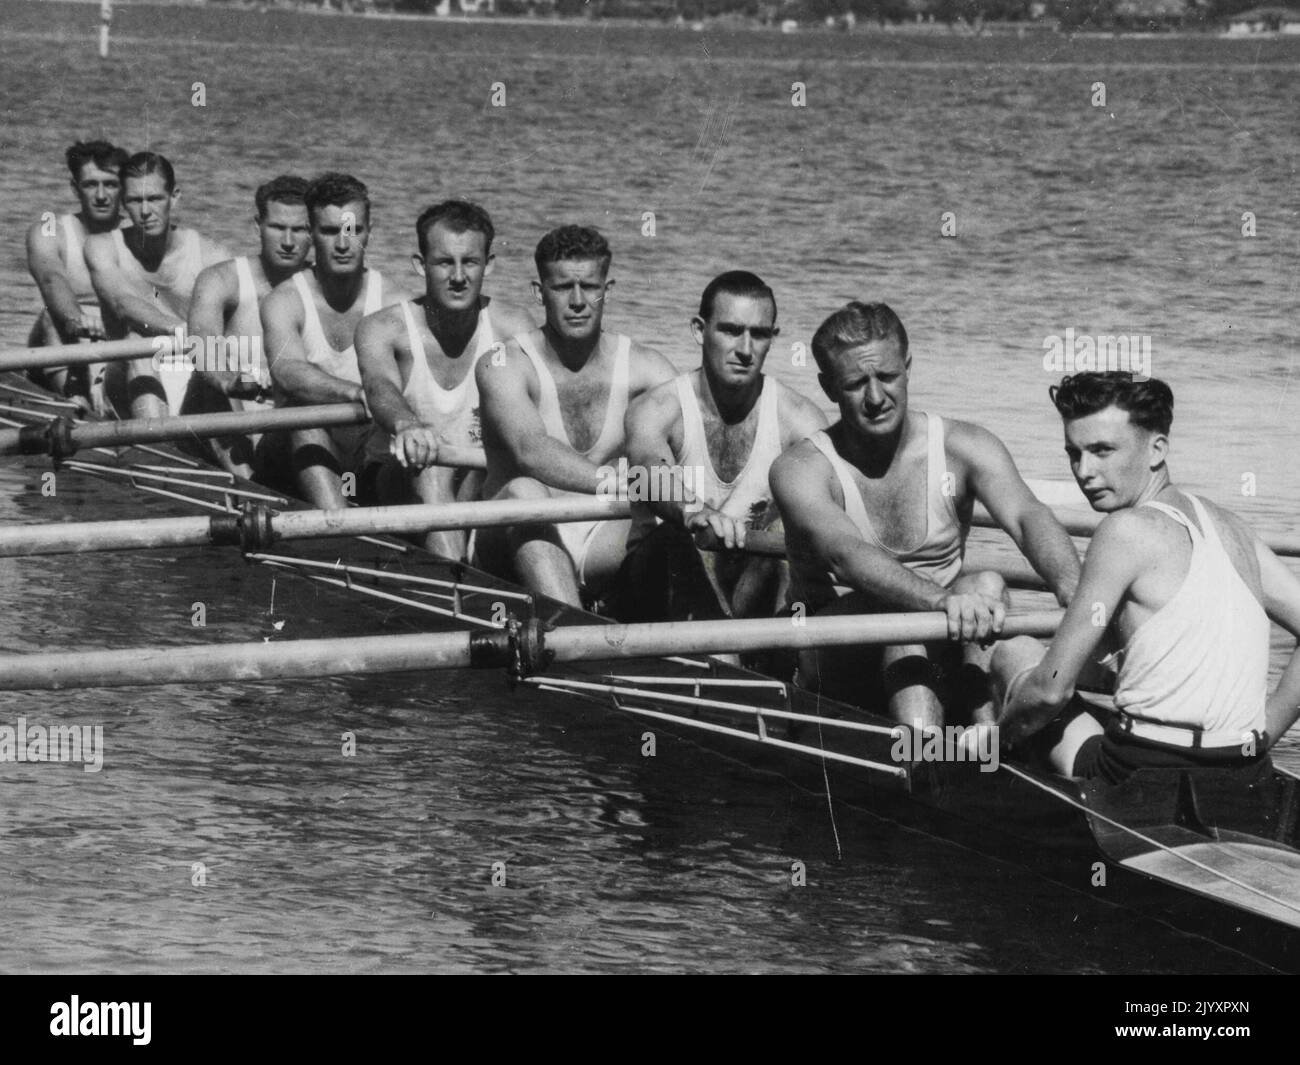 N.S.W. King's Cup Crew à Perth -- L. Robinson (AVC), O.A. Ruffels, P. Webb, B.H. Goswell, c.a. Cogle, G. Montgomerie, D. Bartley, A. Brown (Bow), E.B. Healy (cox). 21 mai 1947. Banque D'Images